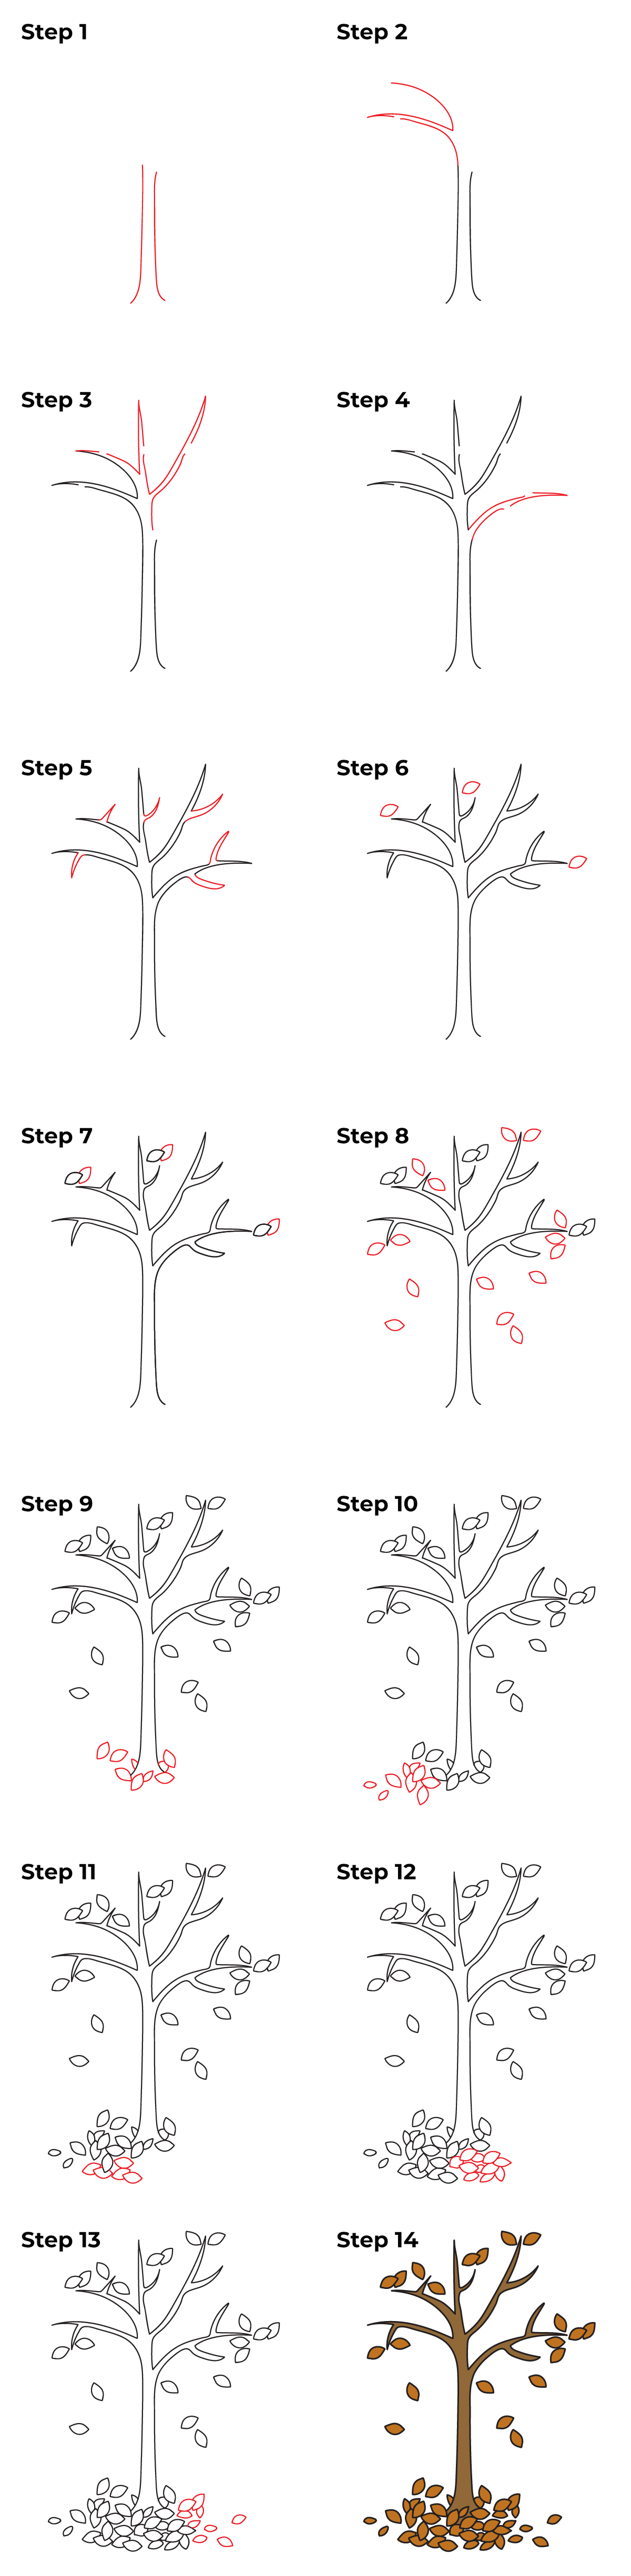 https://museprintables.com/files/how-to-draw/png/how-to-draw-a-fall-tree-tutorial.png